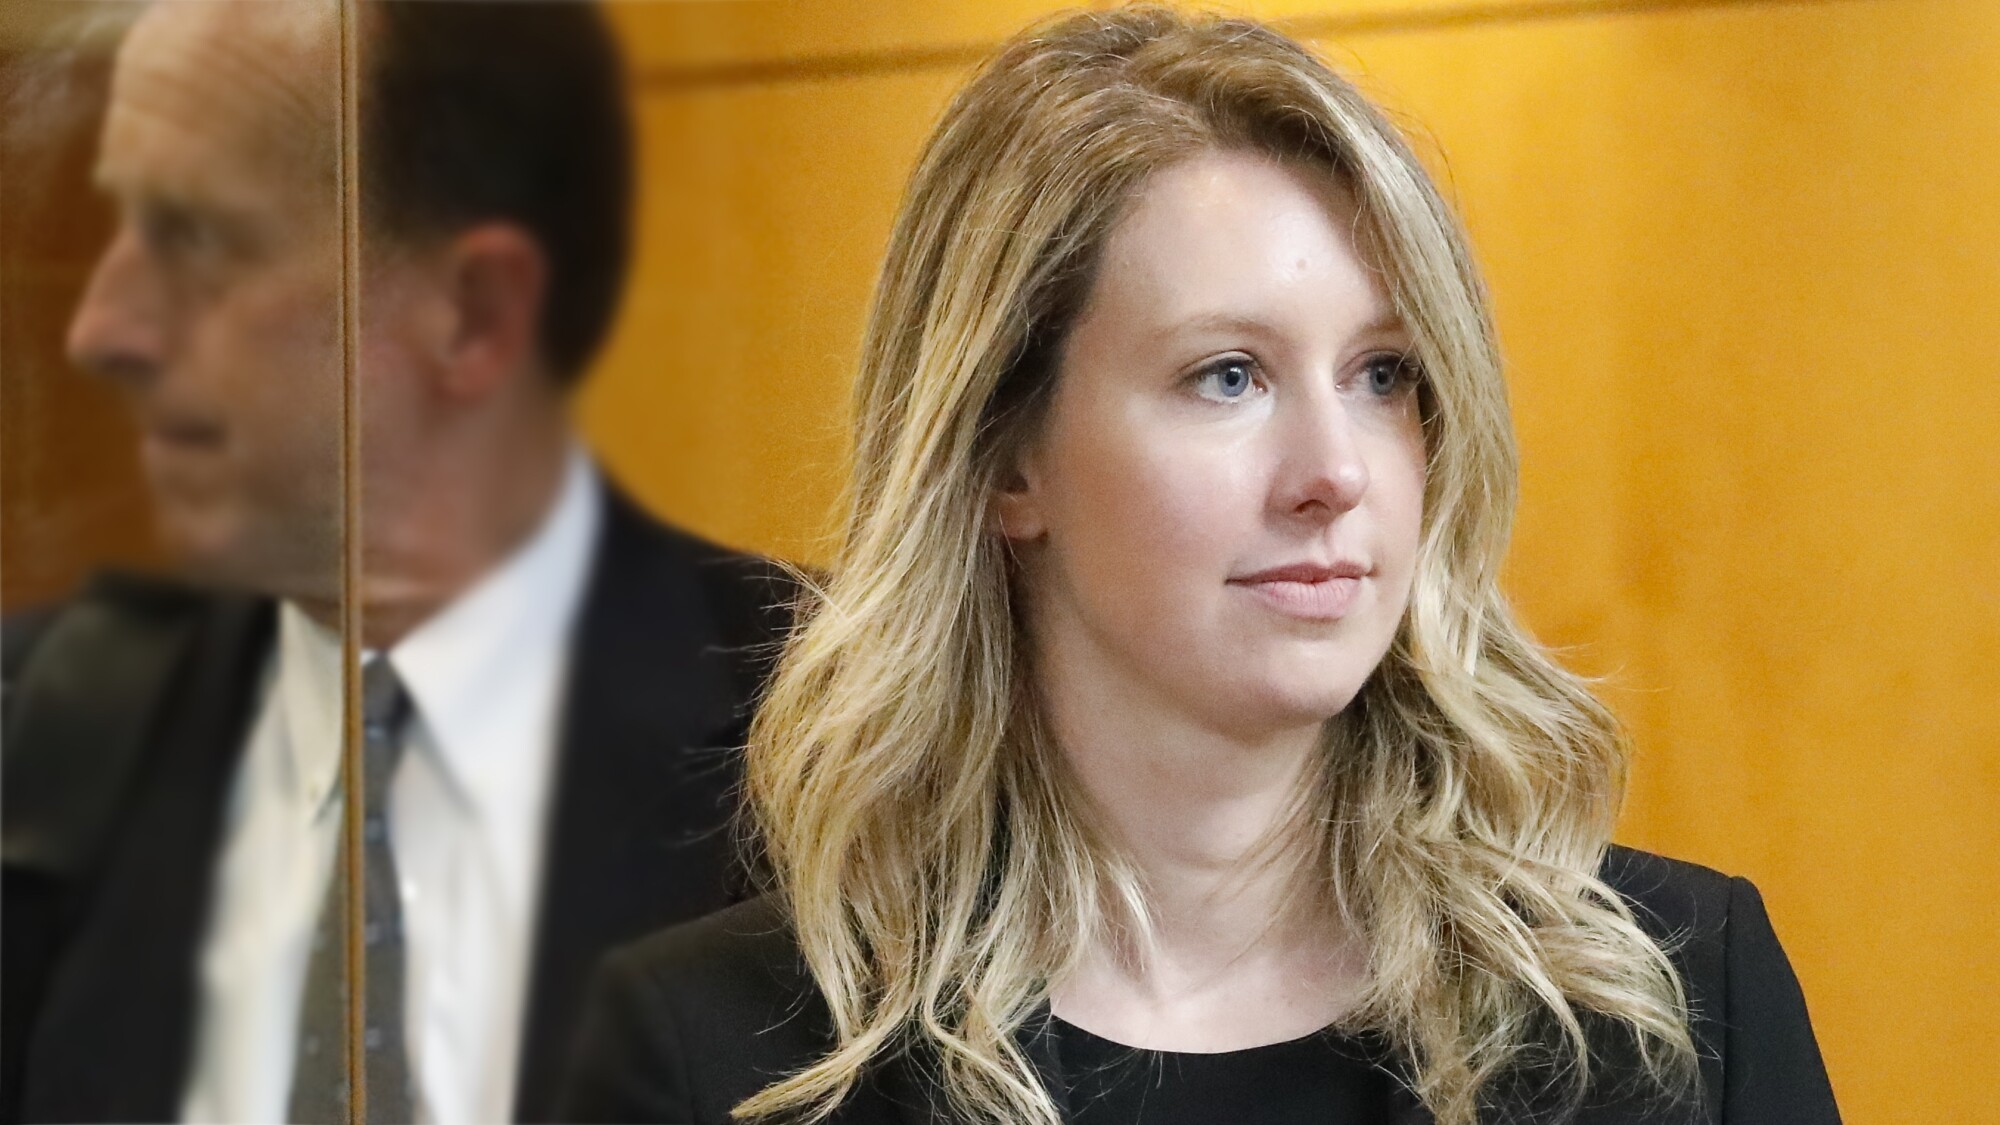 Theranos Founder Elizabeth Holmes Arrives at Court Fraud Hearing